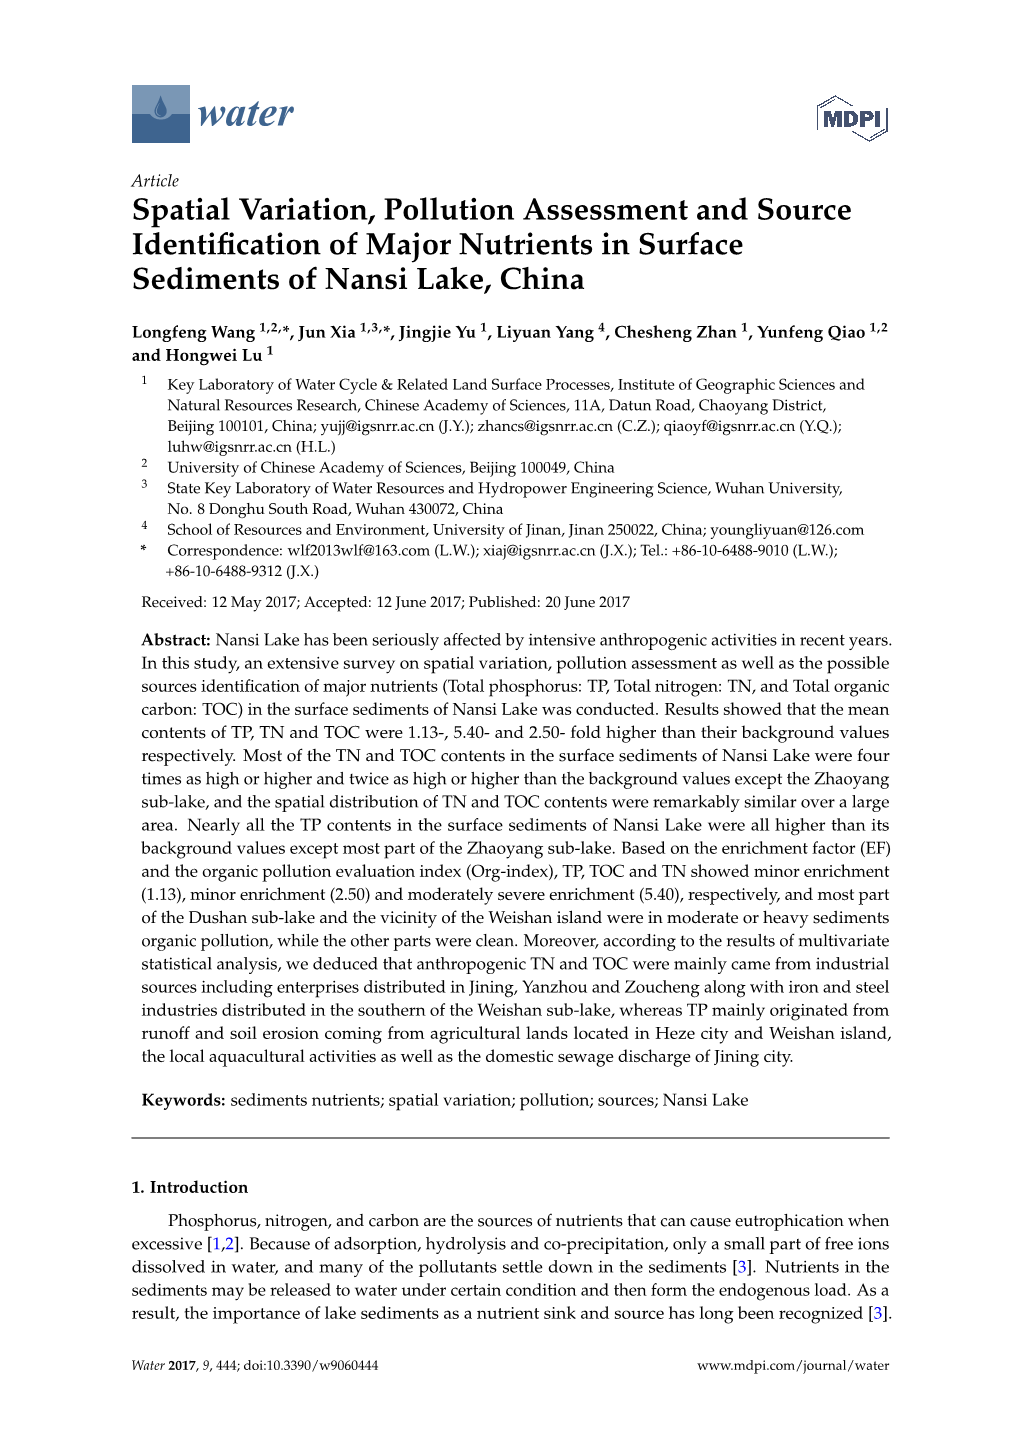 Spatial Variation, Pollution Assessment and Source Identiﬁcation of Major Nutrients in Surface Sediments of Nansi Lake, China